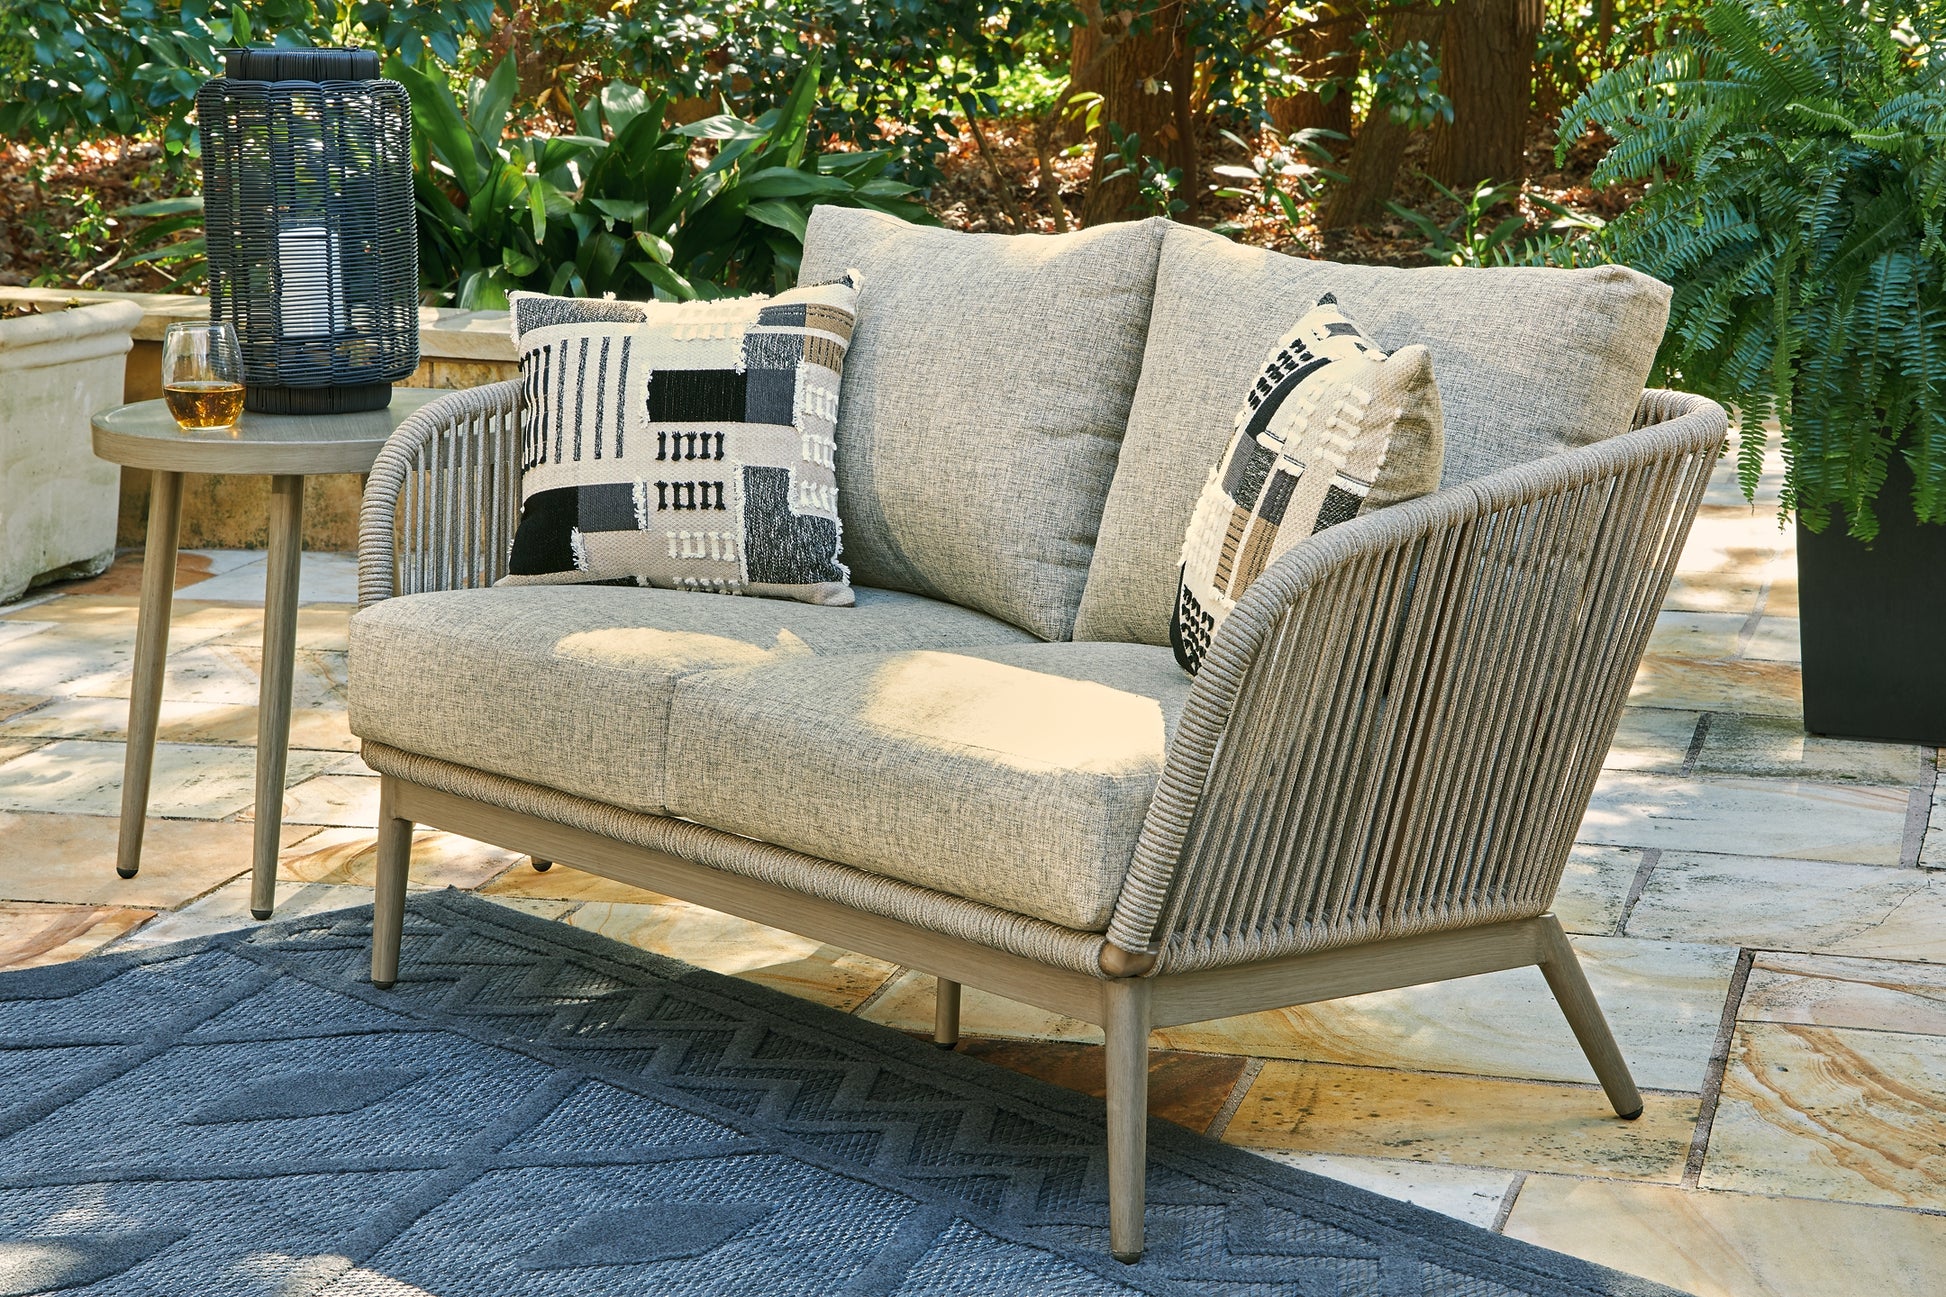 Swiss Valley Outdoor Sofa and Loveseat JB's Furniture  Home Furniture, Home Decor, Furniture Store